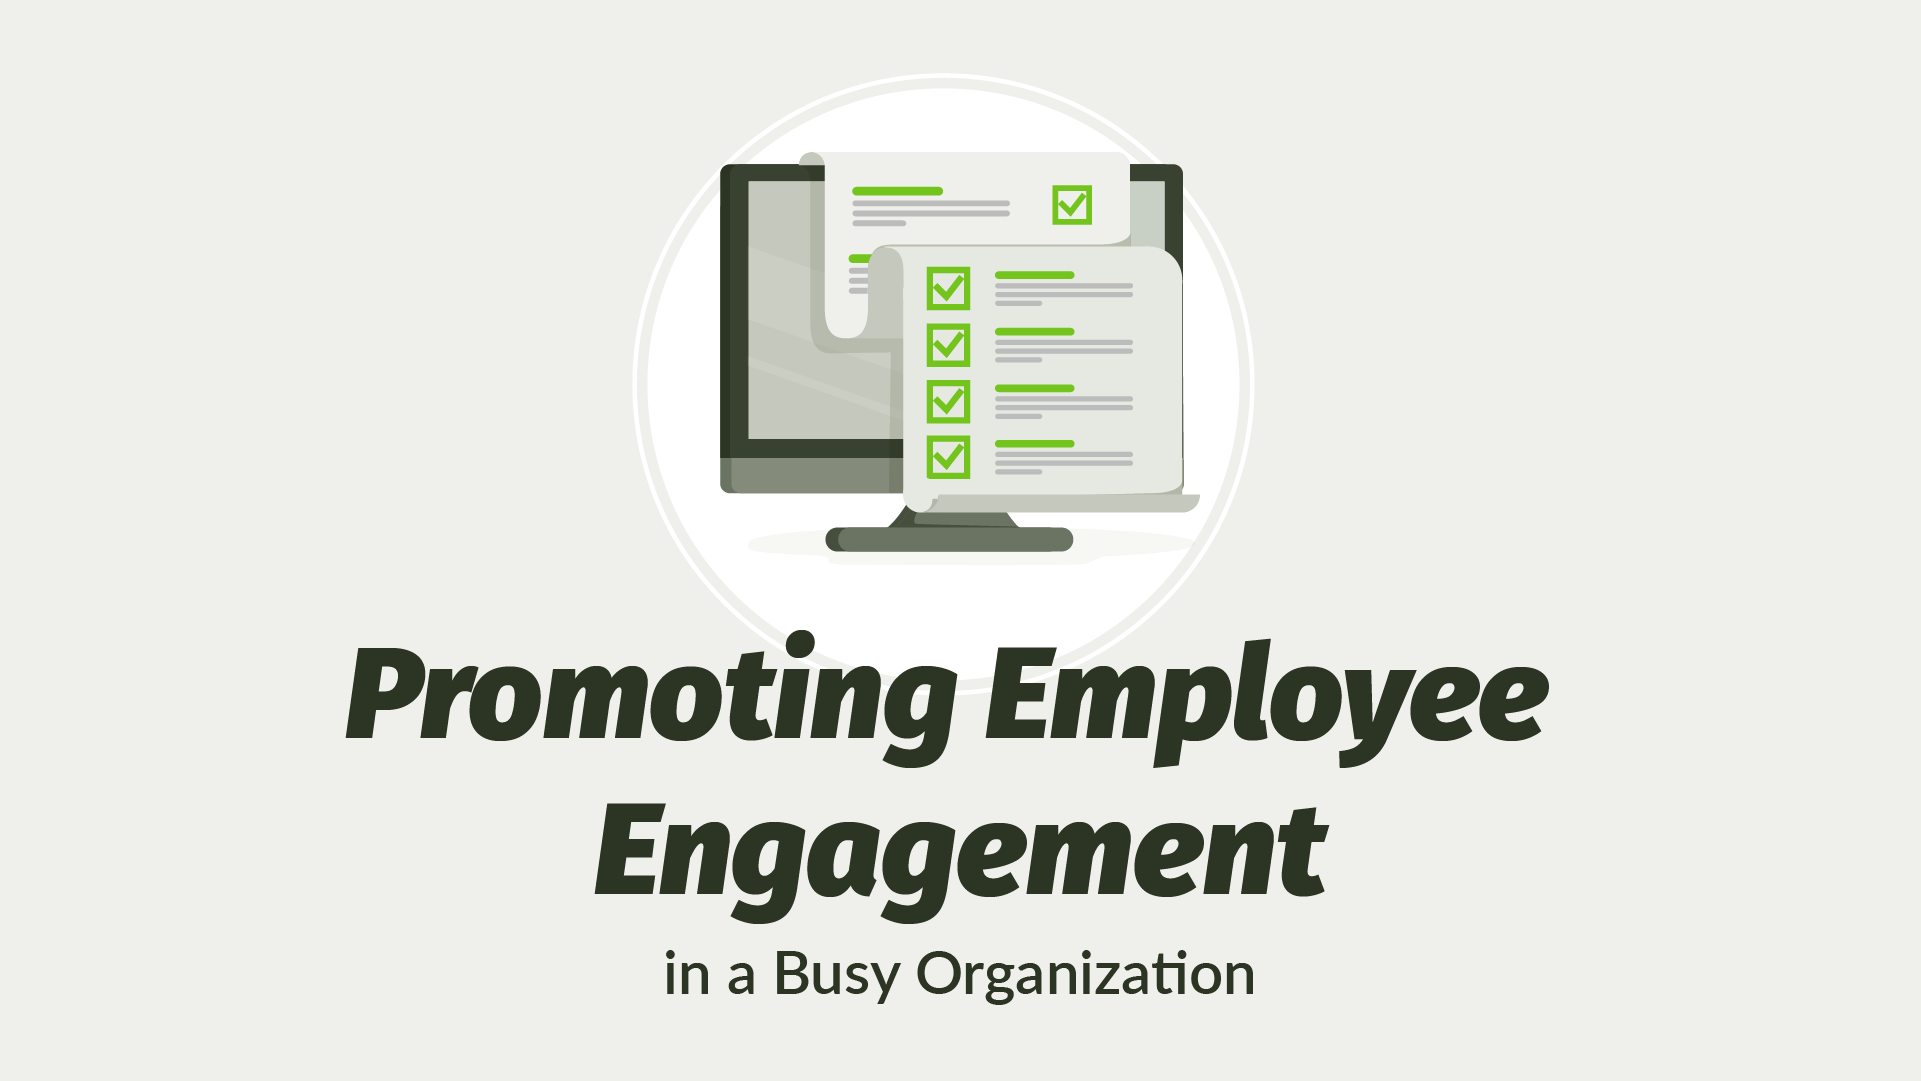 Promoting Employee Engagement in a Busy Organization